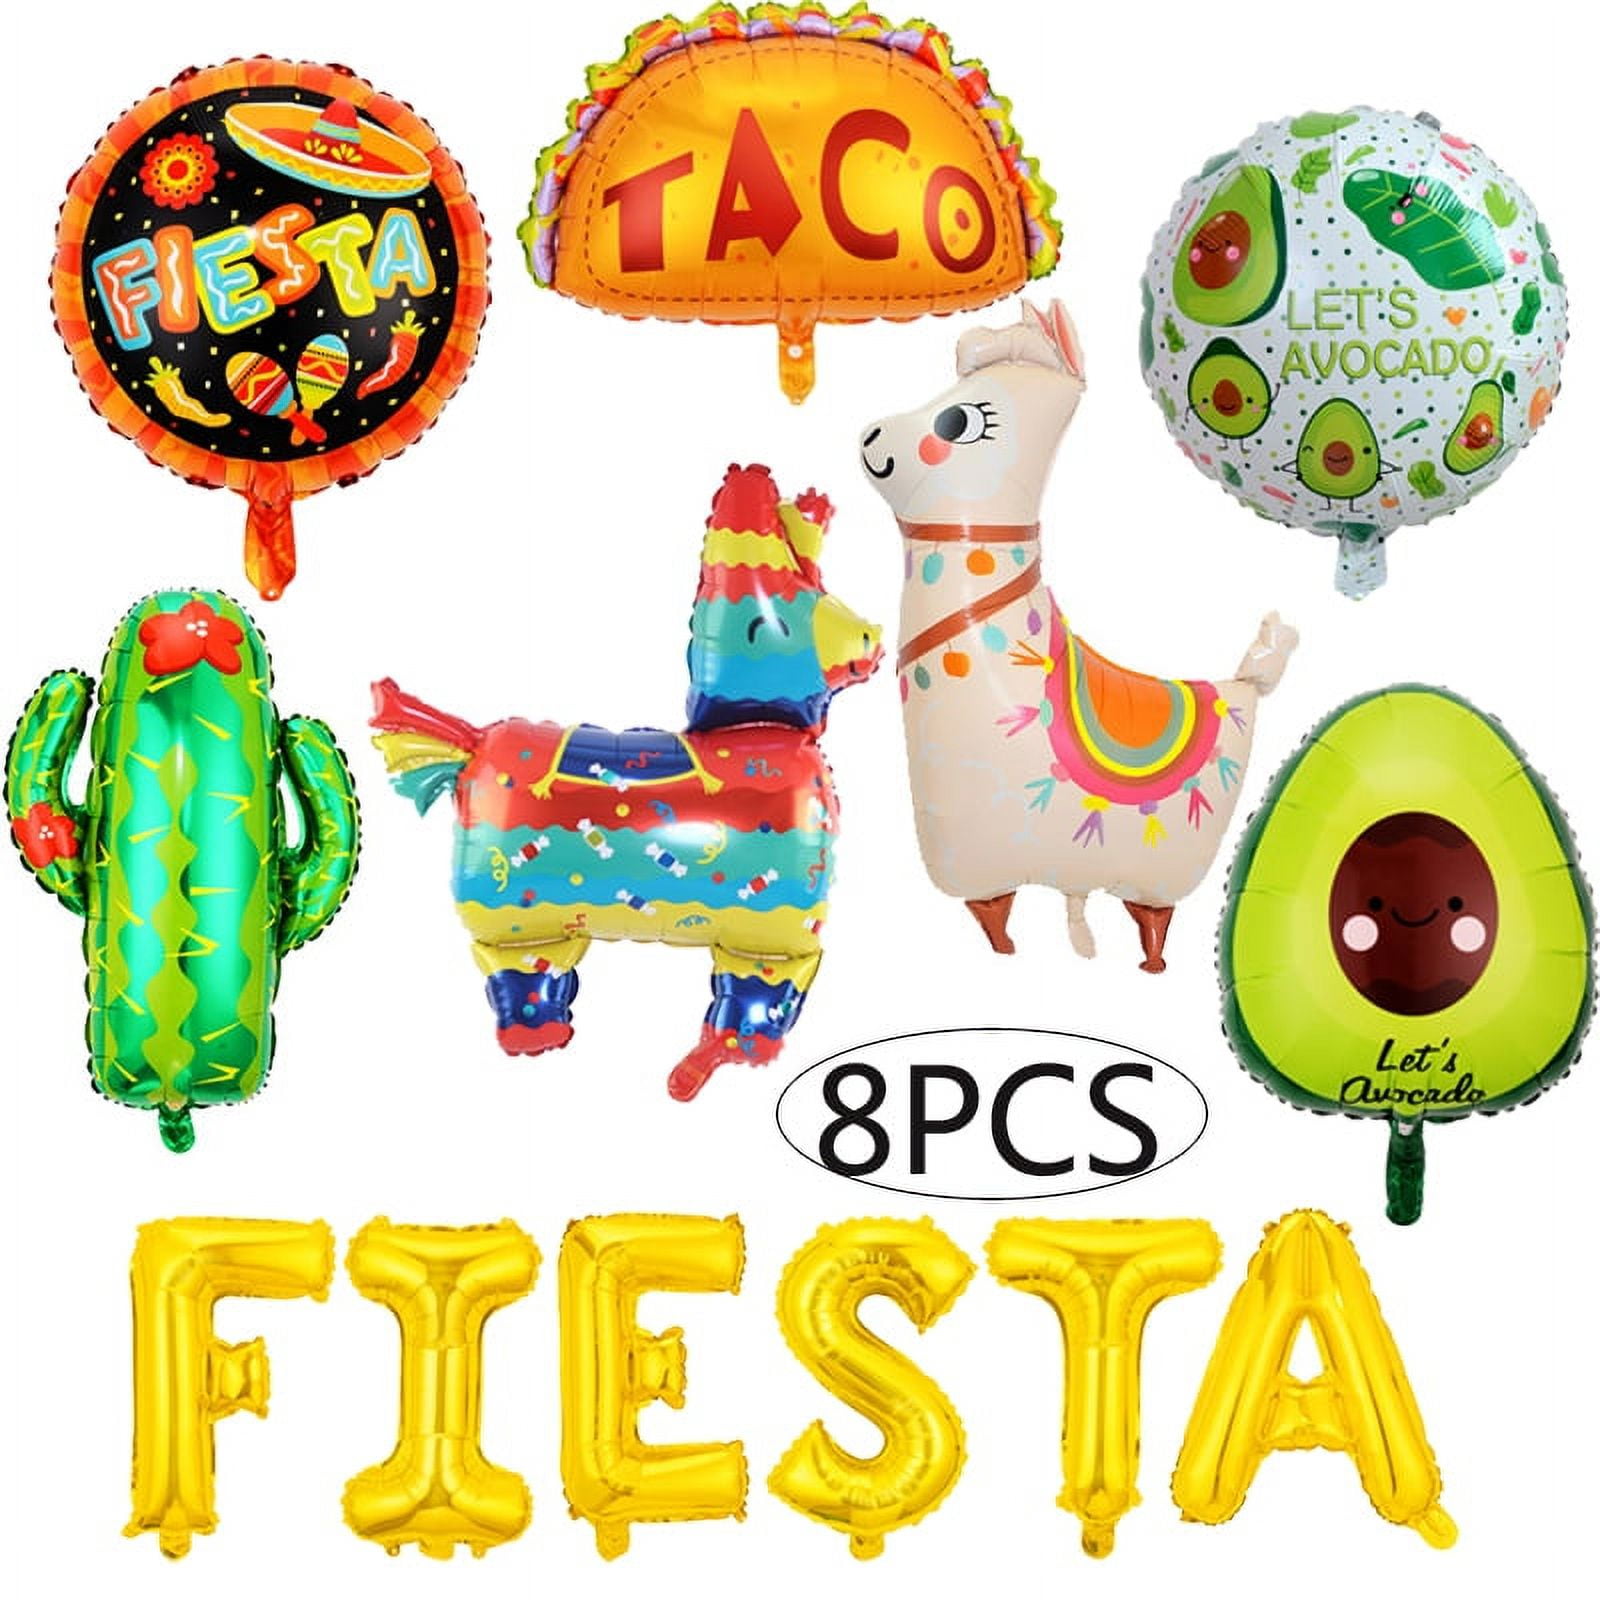 LIYDE 12 PCS Mexican Fiesta Party Favors Cactus Party Supplies